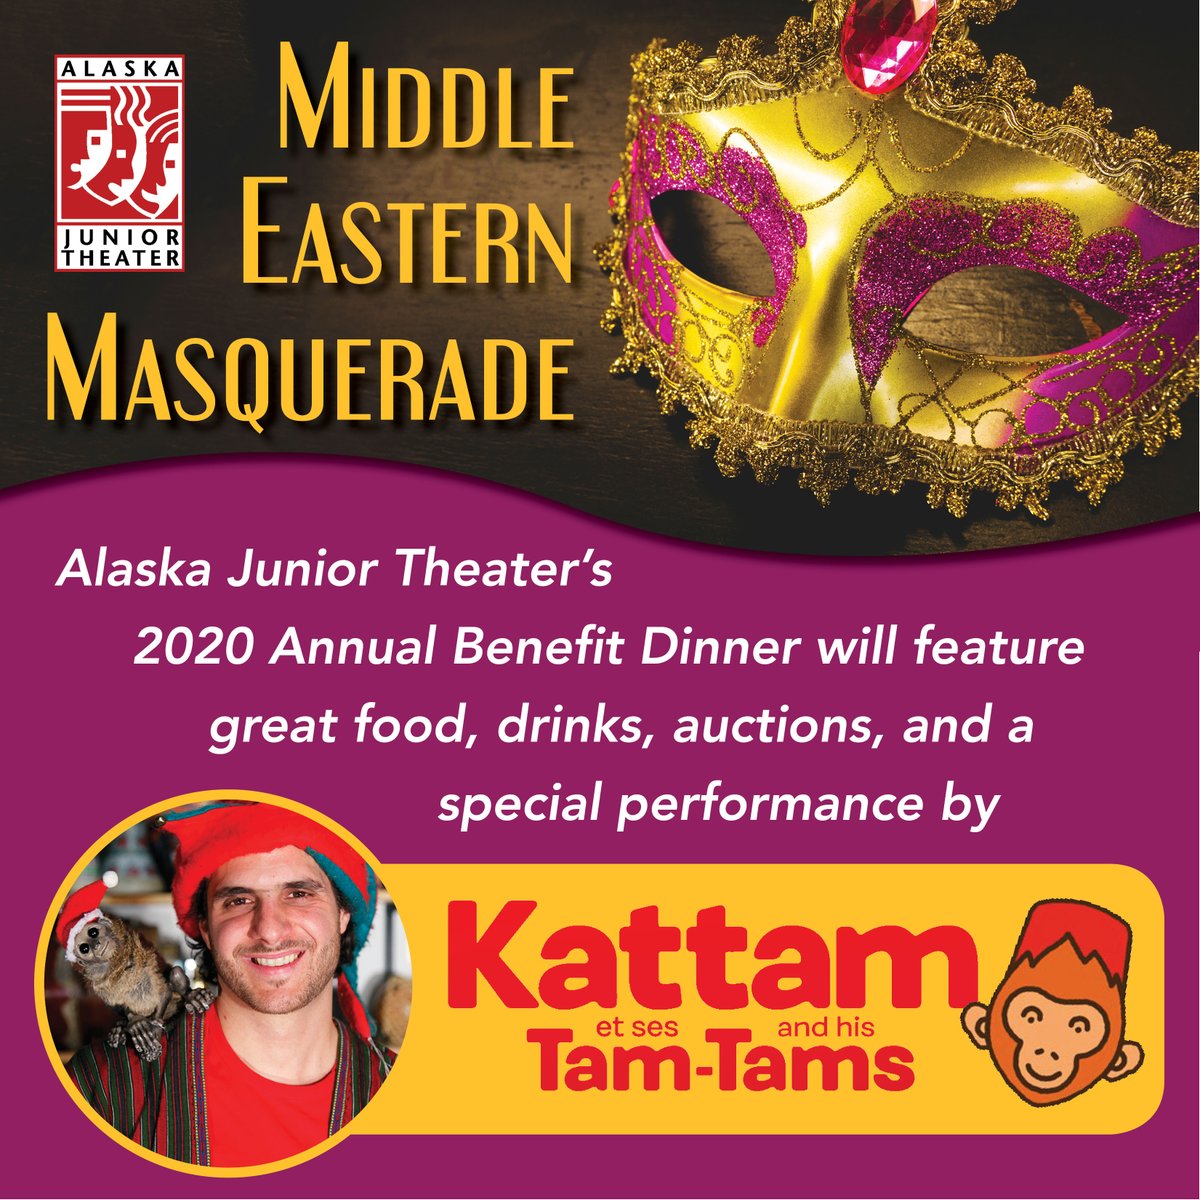 SAVE THE DATE! Join us on March 21 as AJT celebrates 38 years of bringing the best professional performing arts to Alaska’s youth! To purchase a ticket or table of 8, make a donation, or for more info, call 272-7546.
#AlaskaJuniorTheater #Alaska #Anchorage #thingstodoinalaska